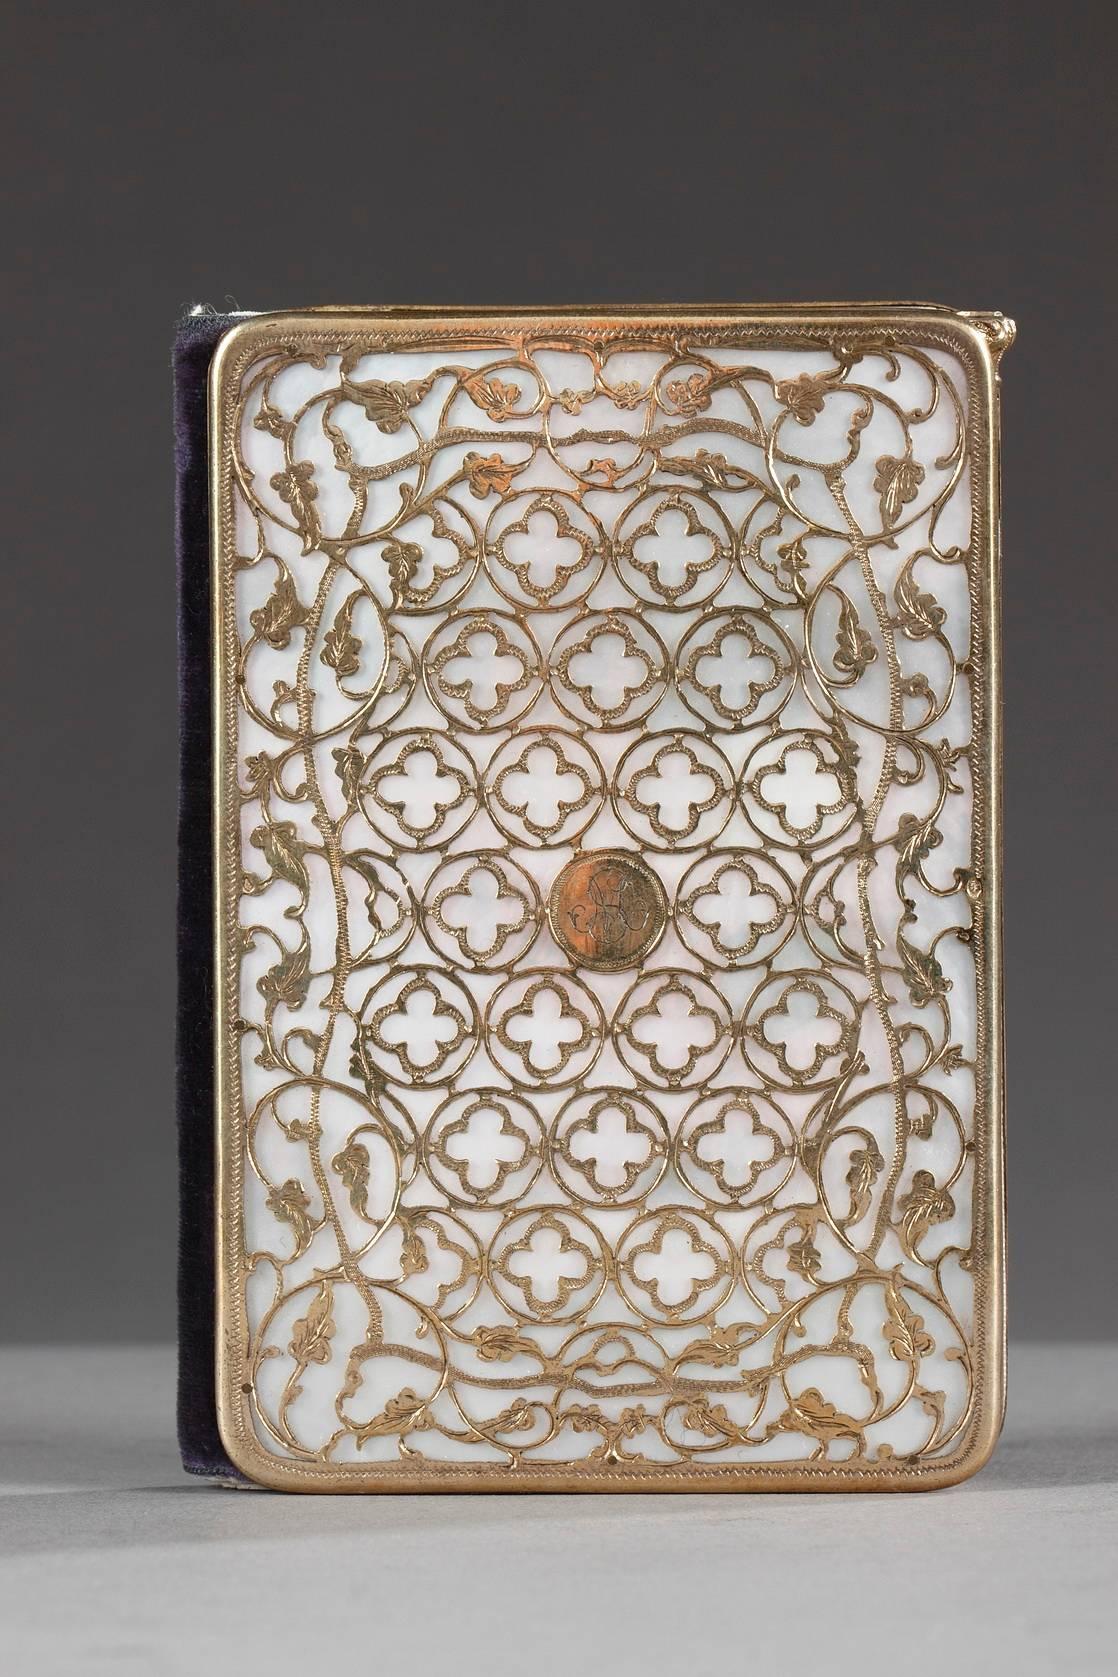 French 19th Century Dance Card in Mother of Pearl and Silver Gilt